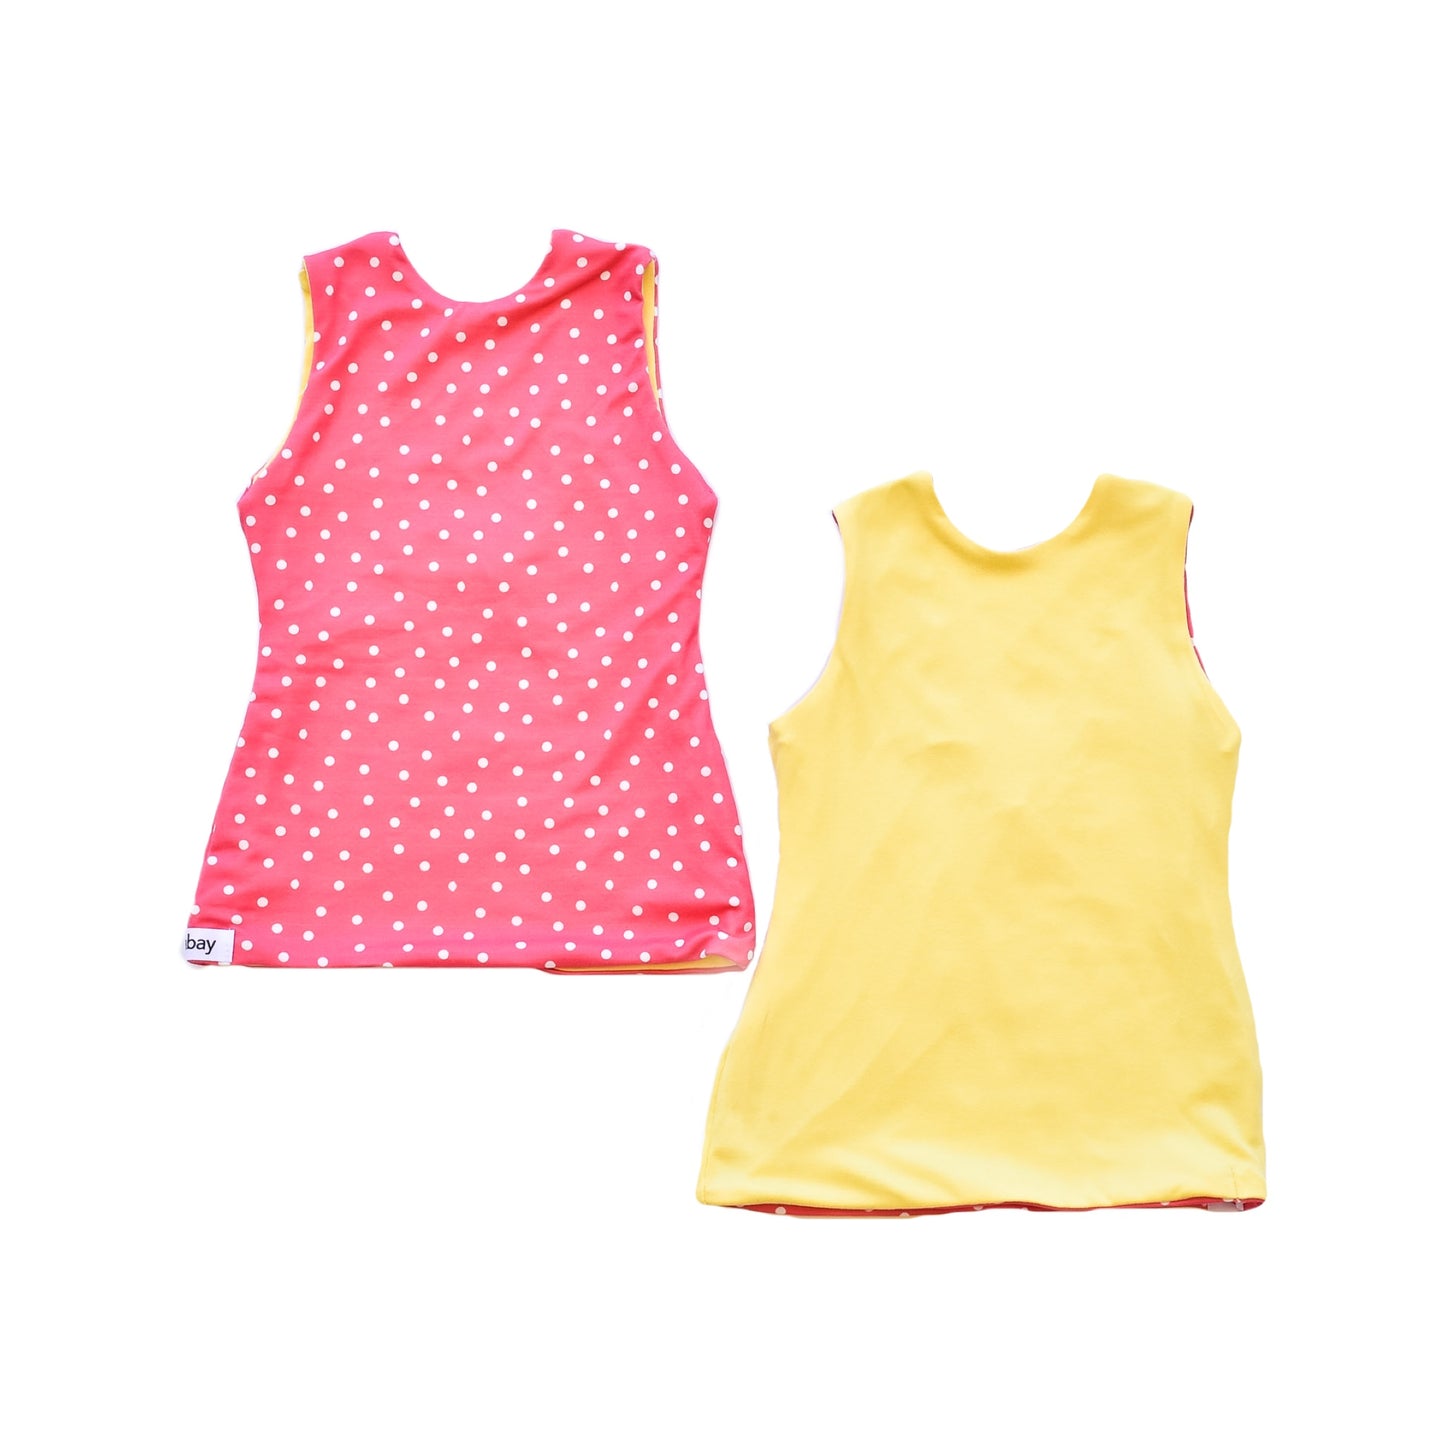 Fitted Top - Pink Polka Dot/Yellow (reversible w/ sleeveless)